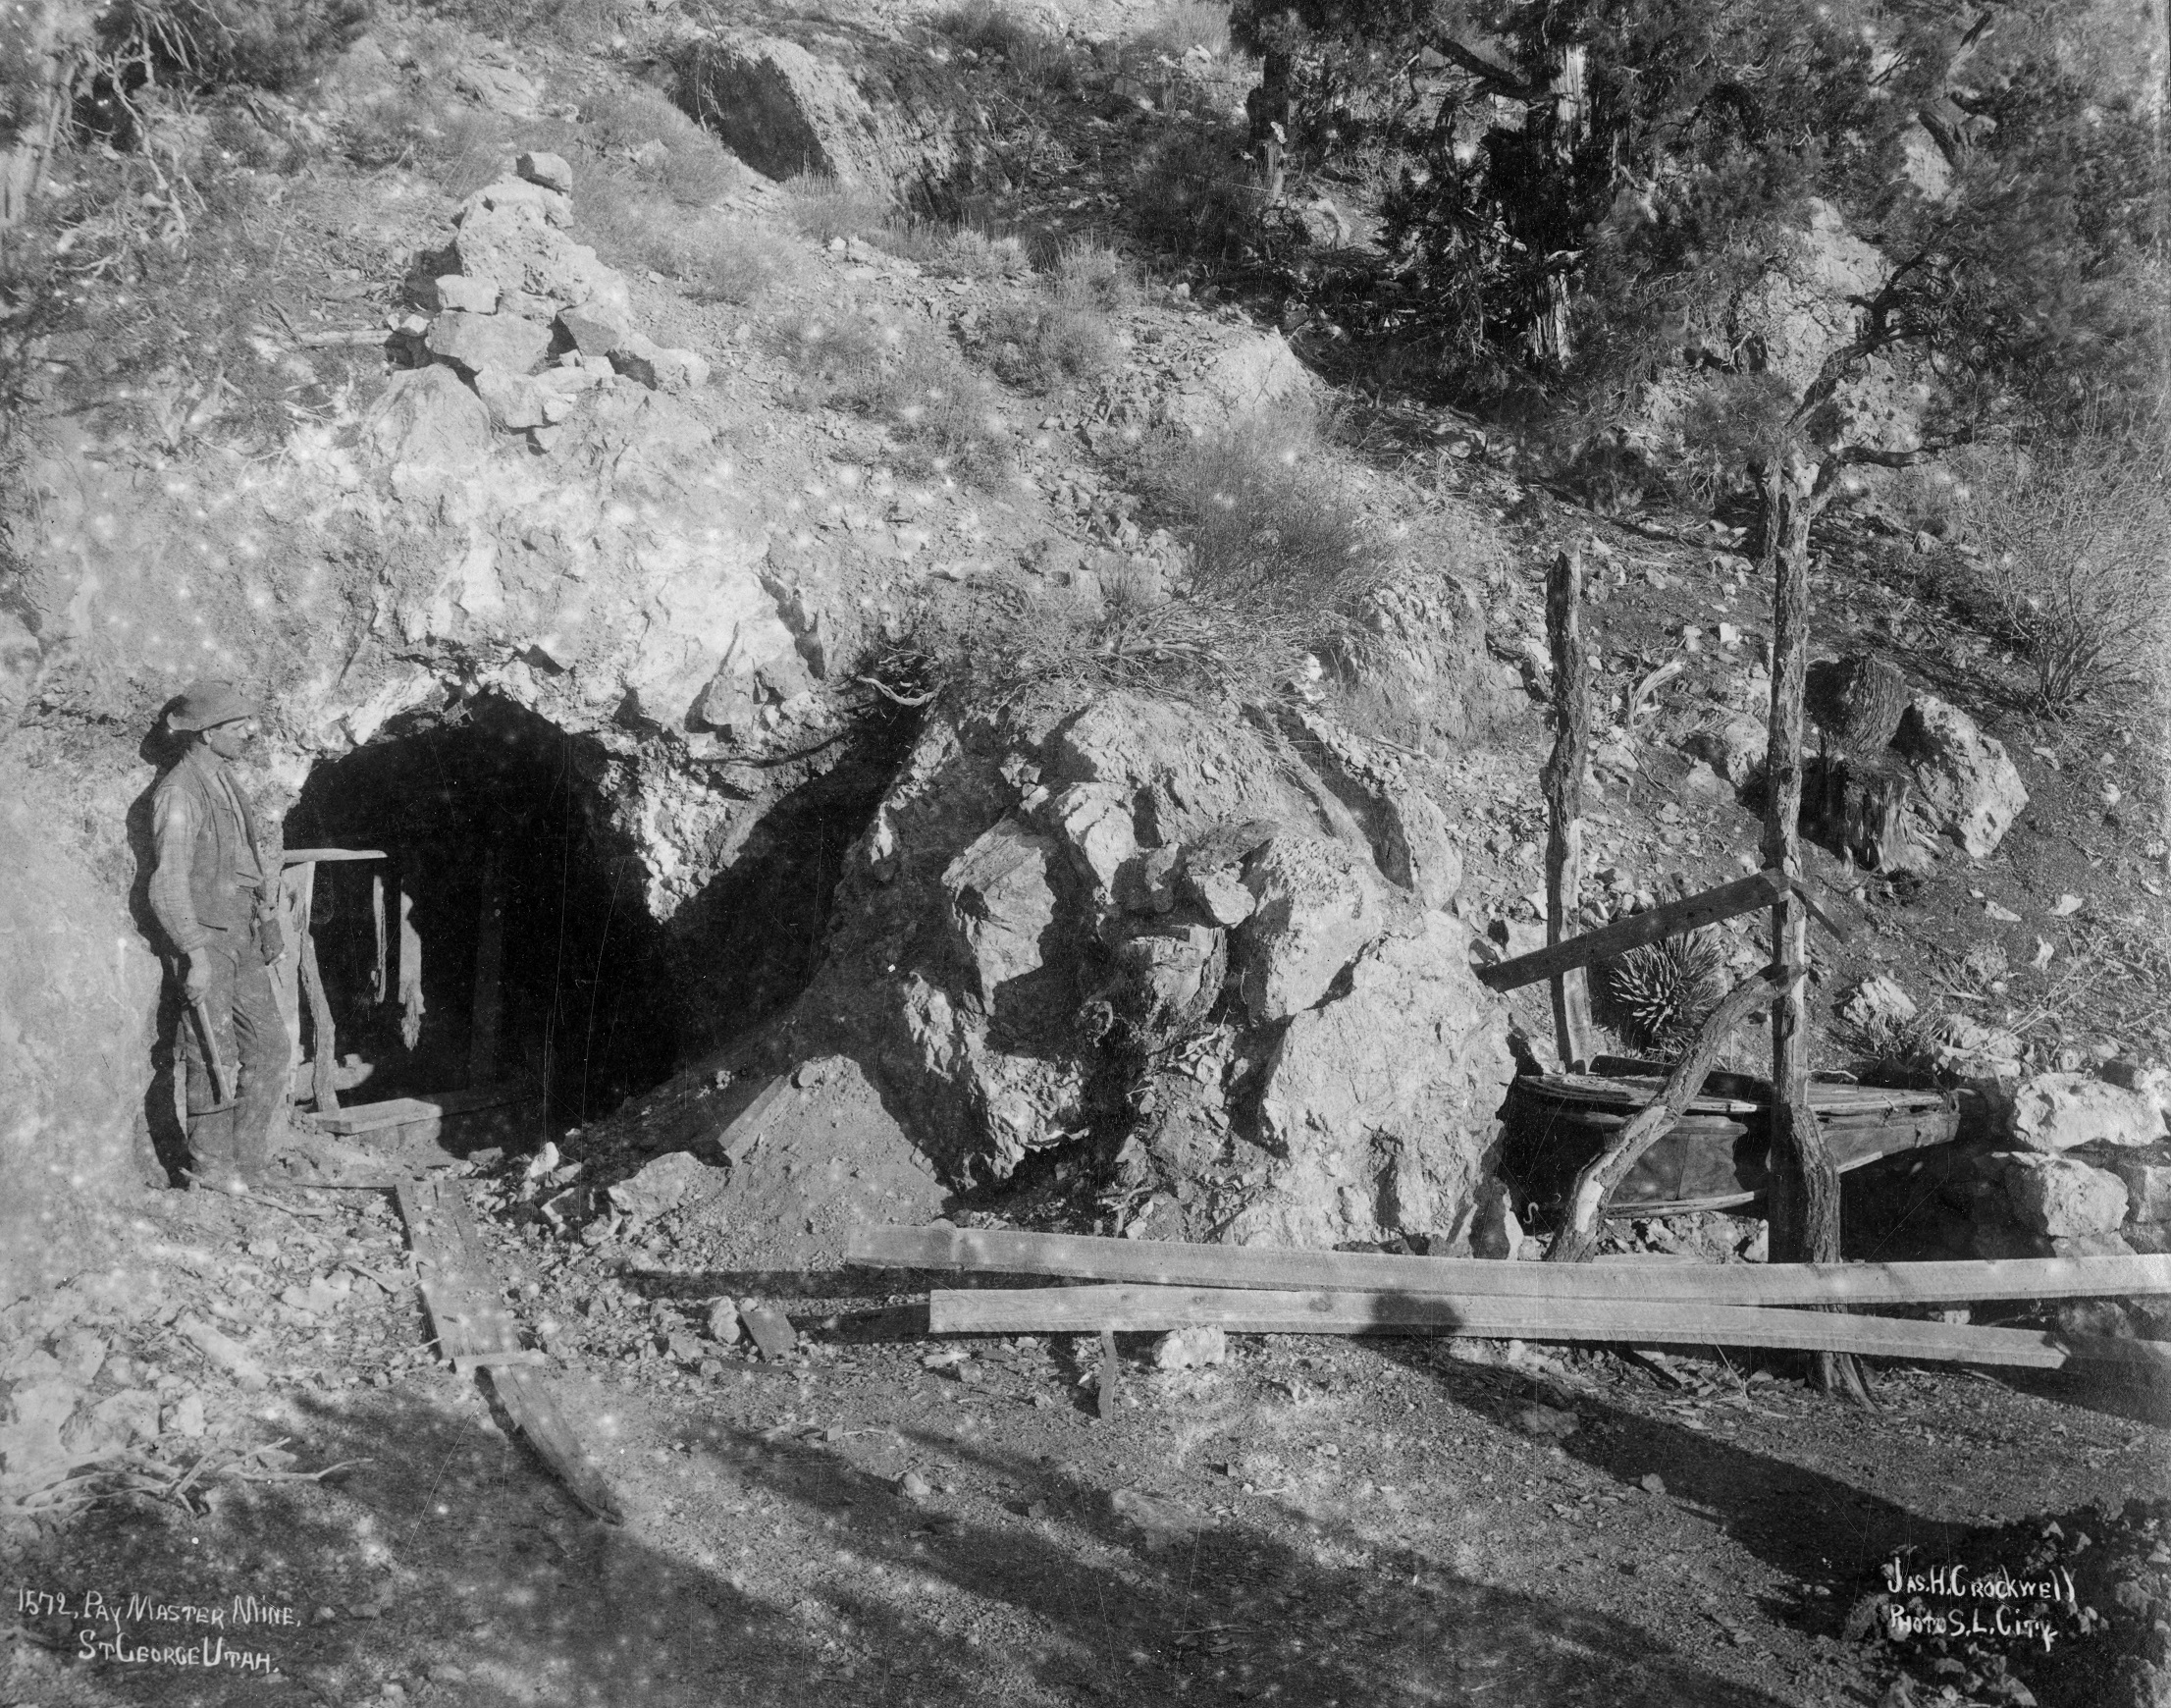 Entrance to the Paymaster Mine in 1900